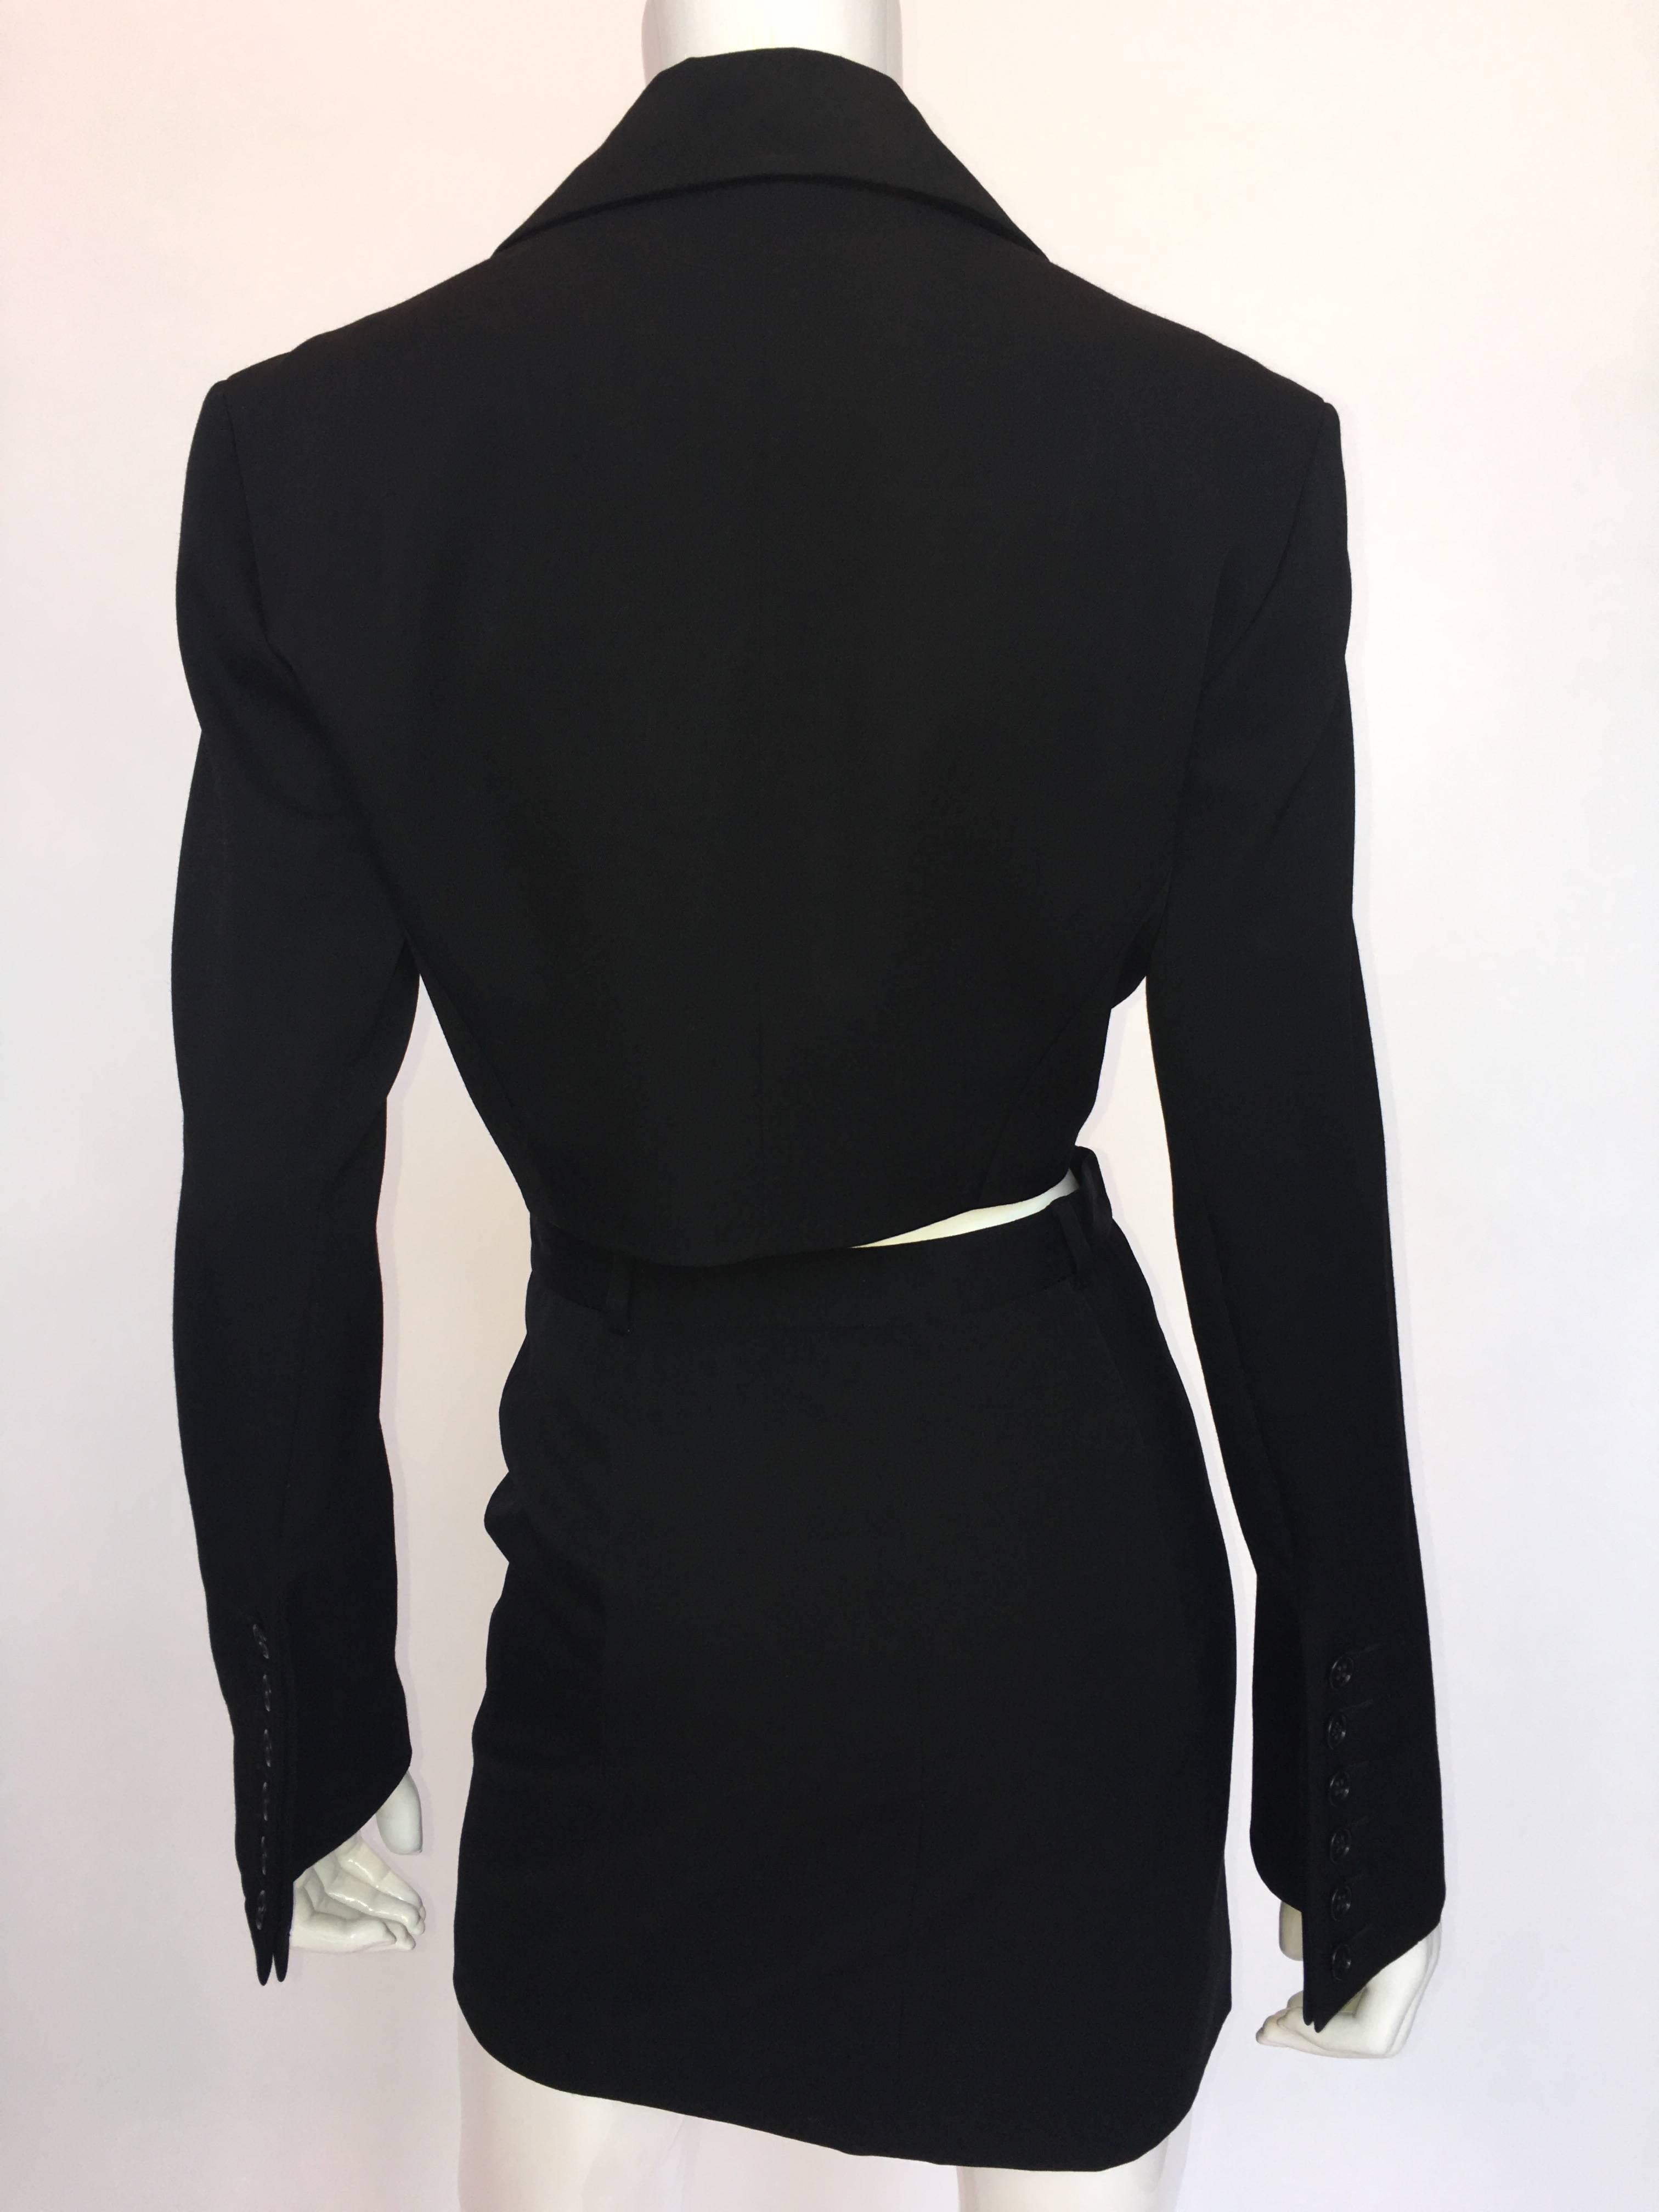 1980s OMO by Norma Kamali Black Wool Mini Skirt Suit with Button Detail In Good Condition For Sale In Los Angeles, CA